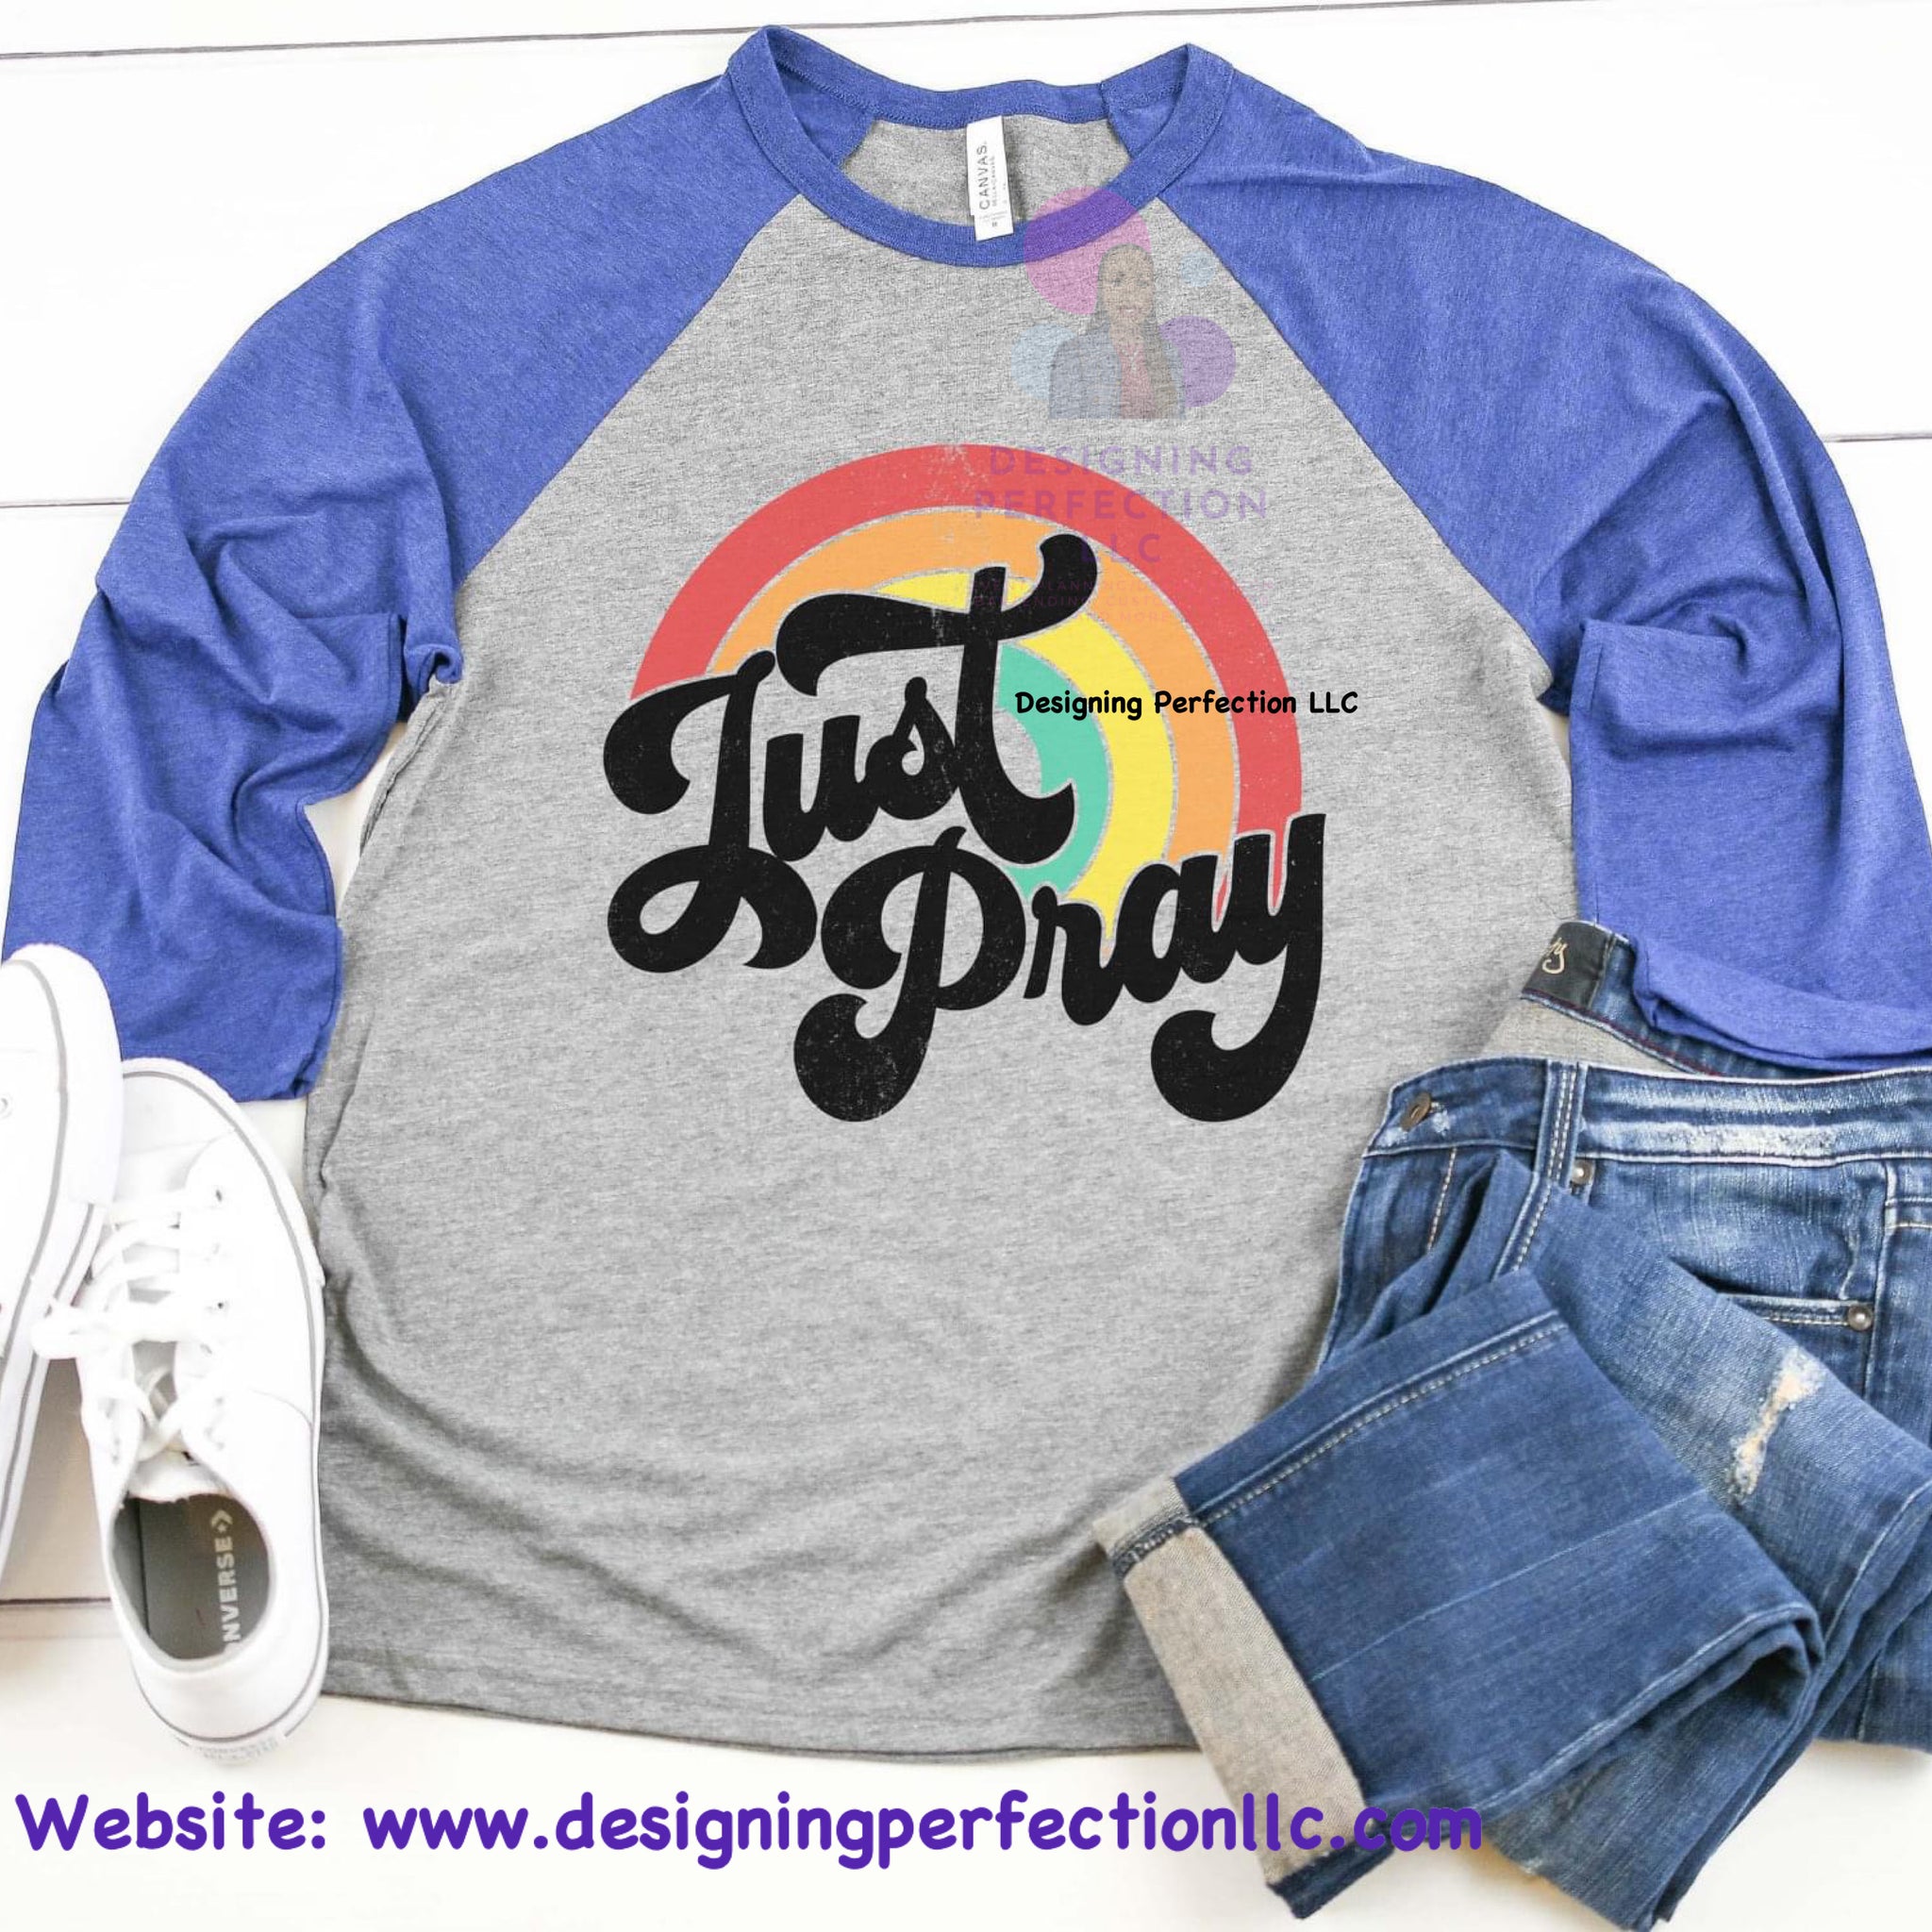 Just Pray- Priced for a Tee, additional options below (B1)